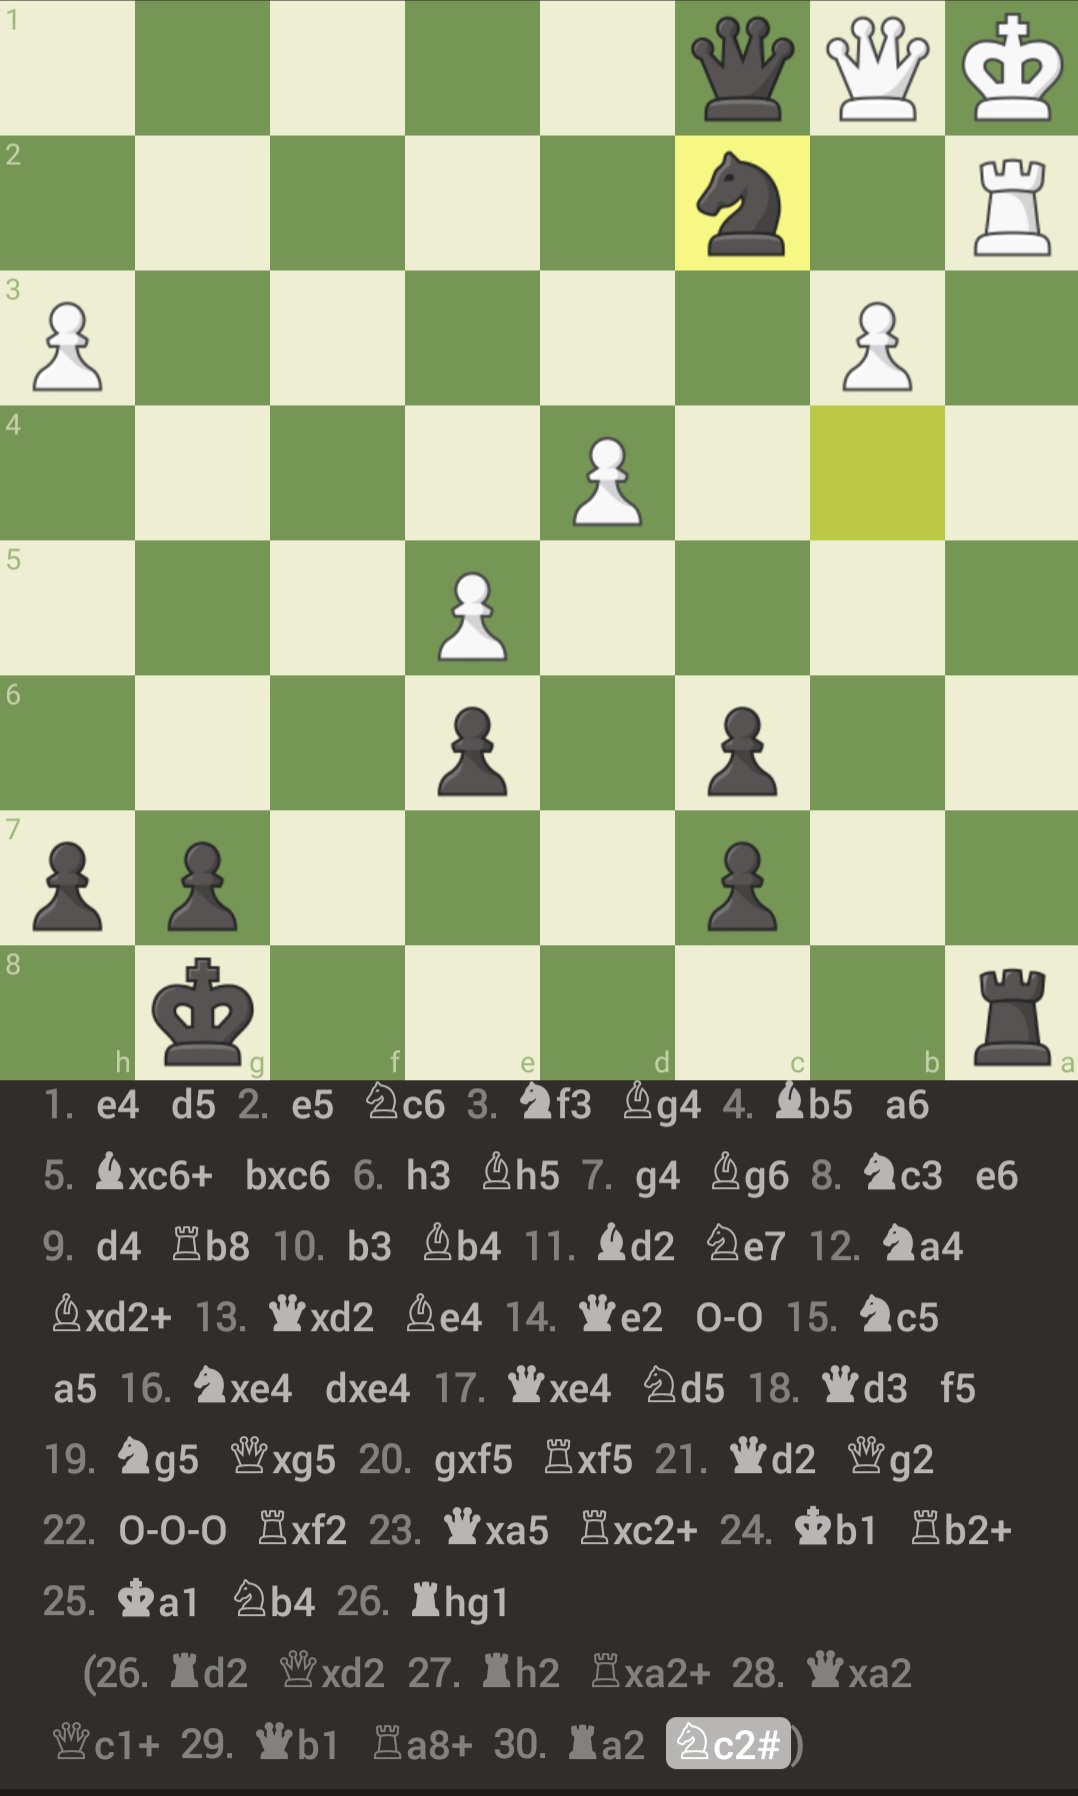 Try Chessable PRO For Free!